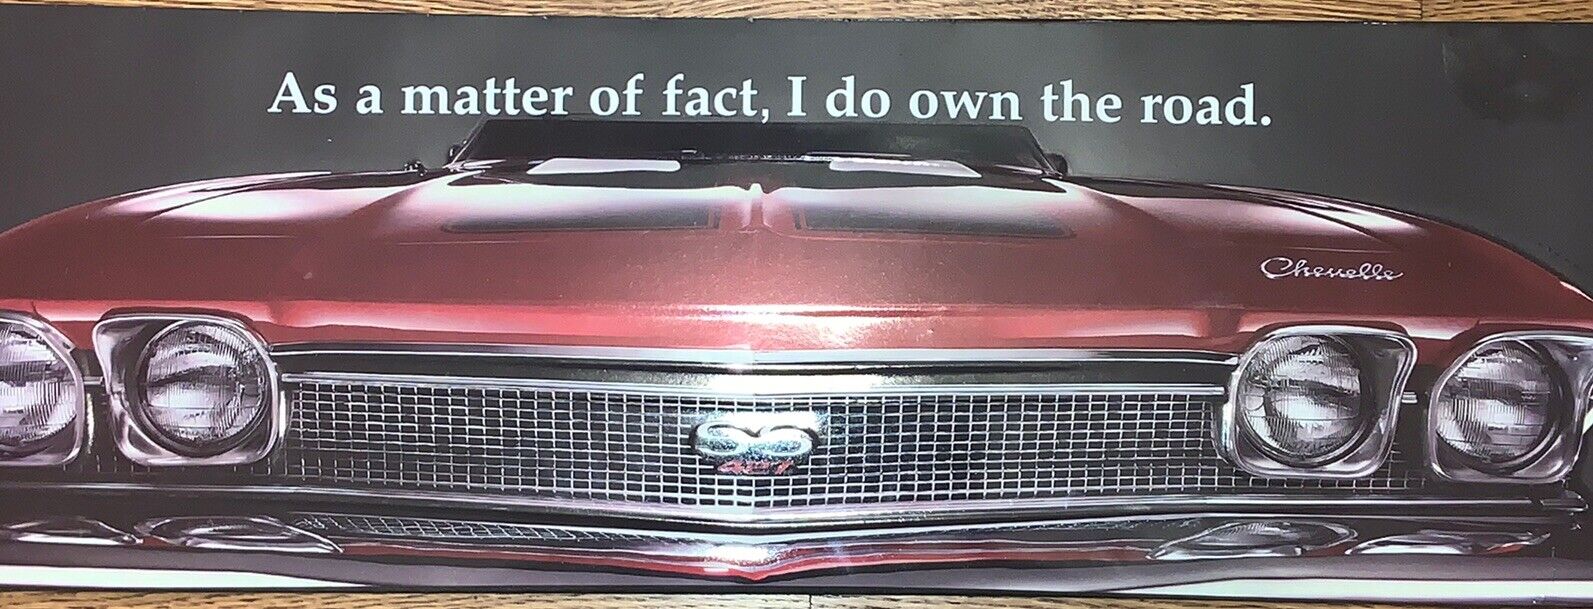 SS 427 CHEVROLET CAMERO SIGN AS A MATTER OF FACT I DO OWN THE ROAD DECOR METAL